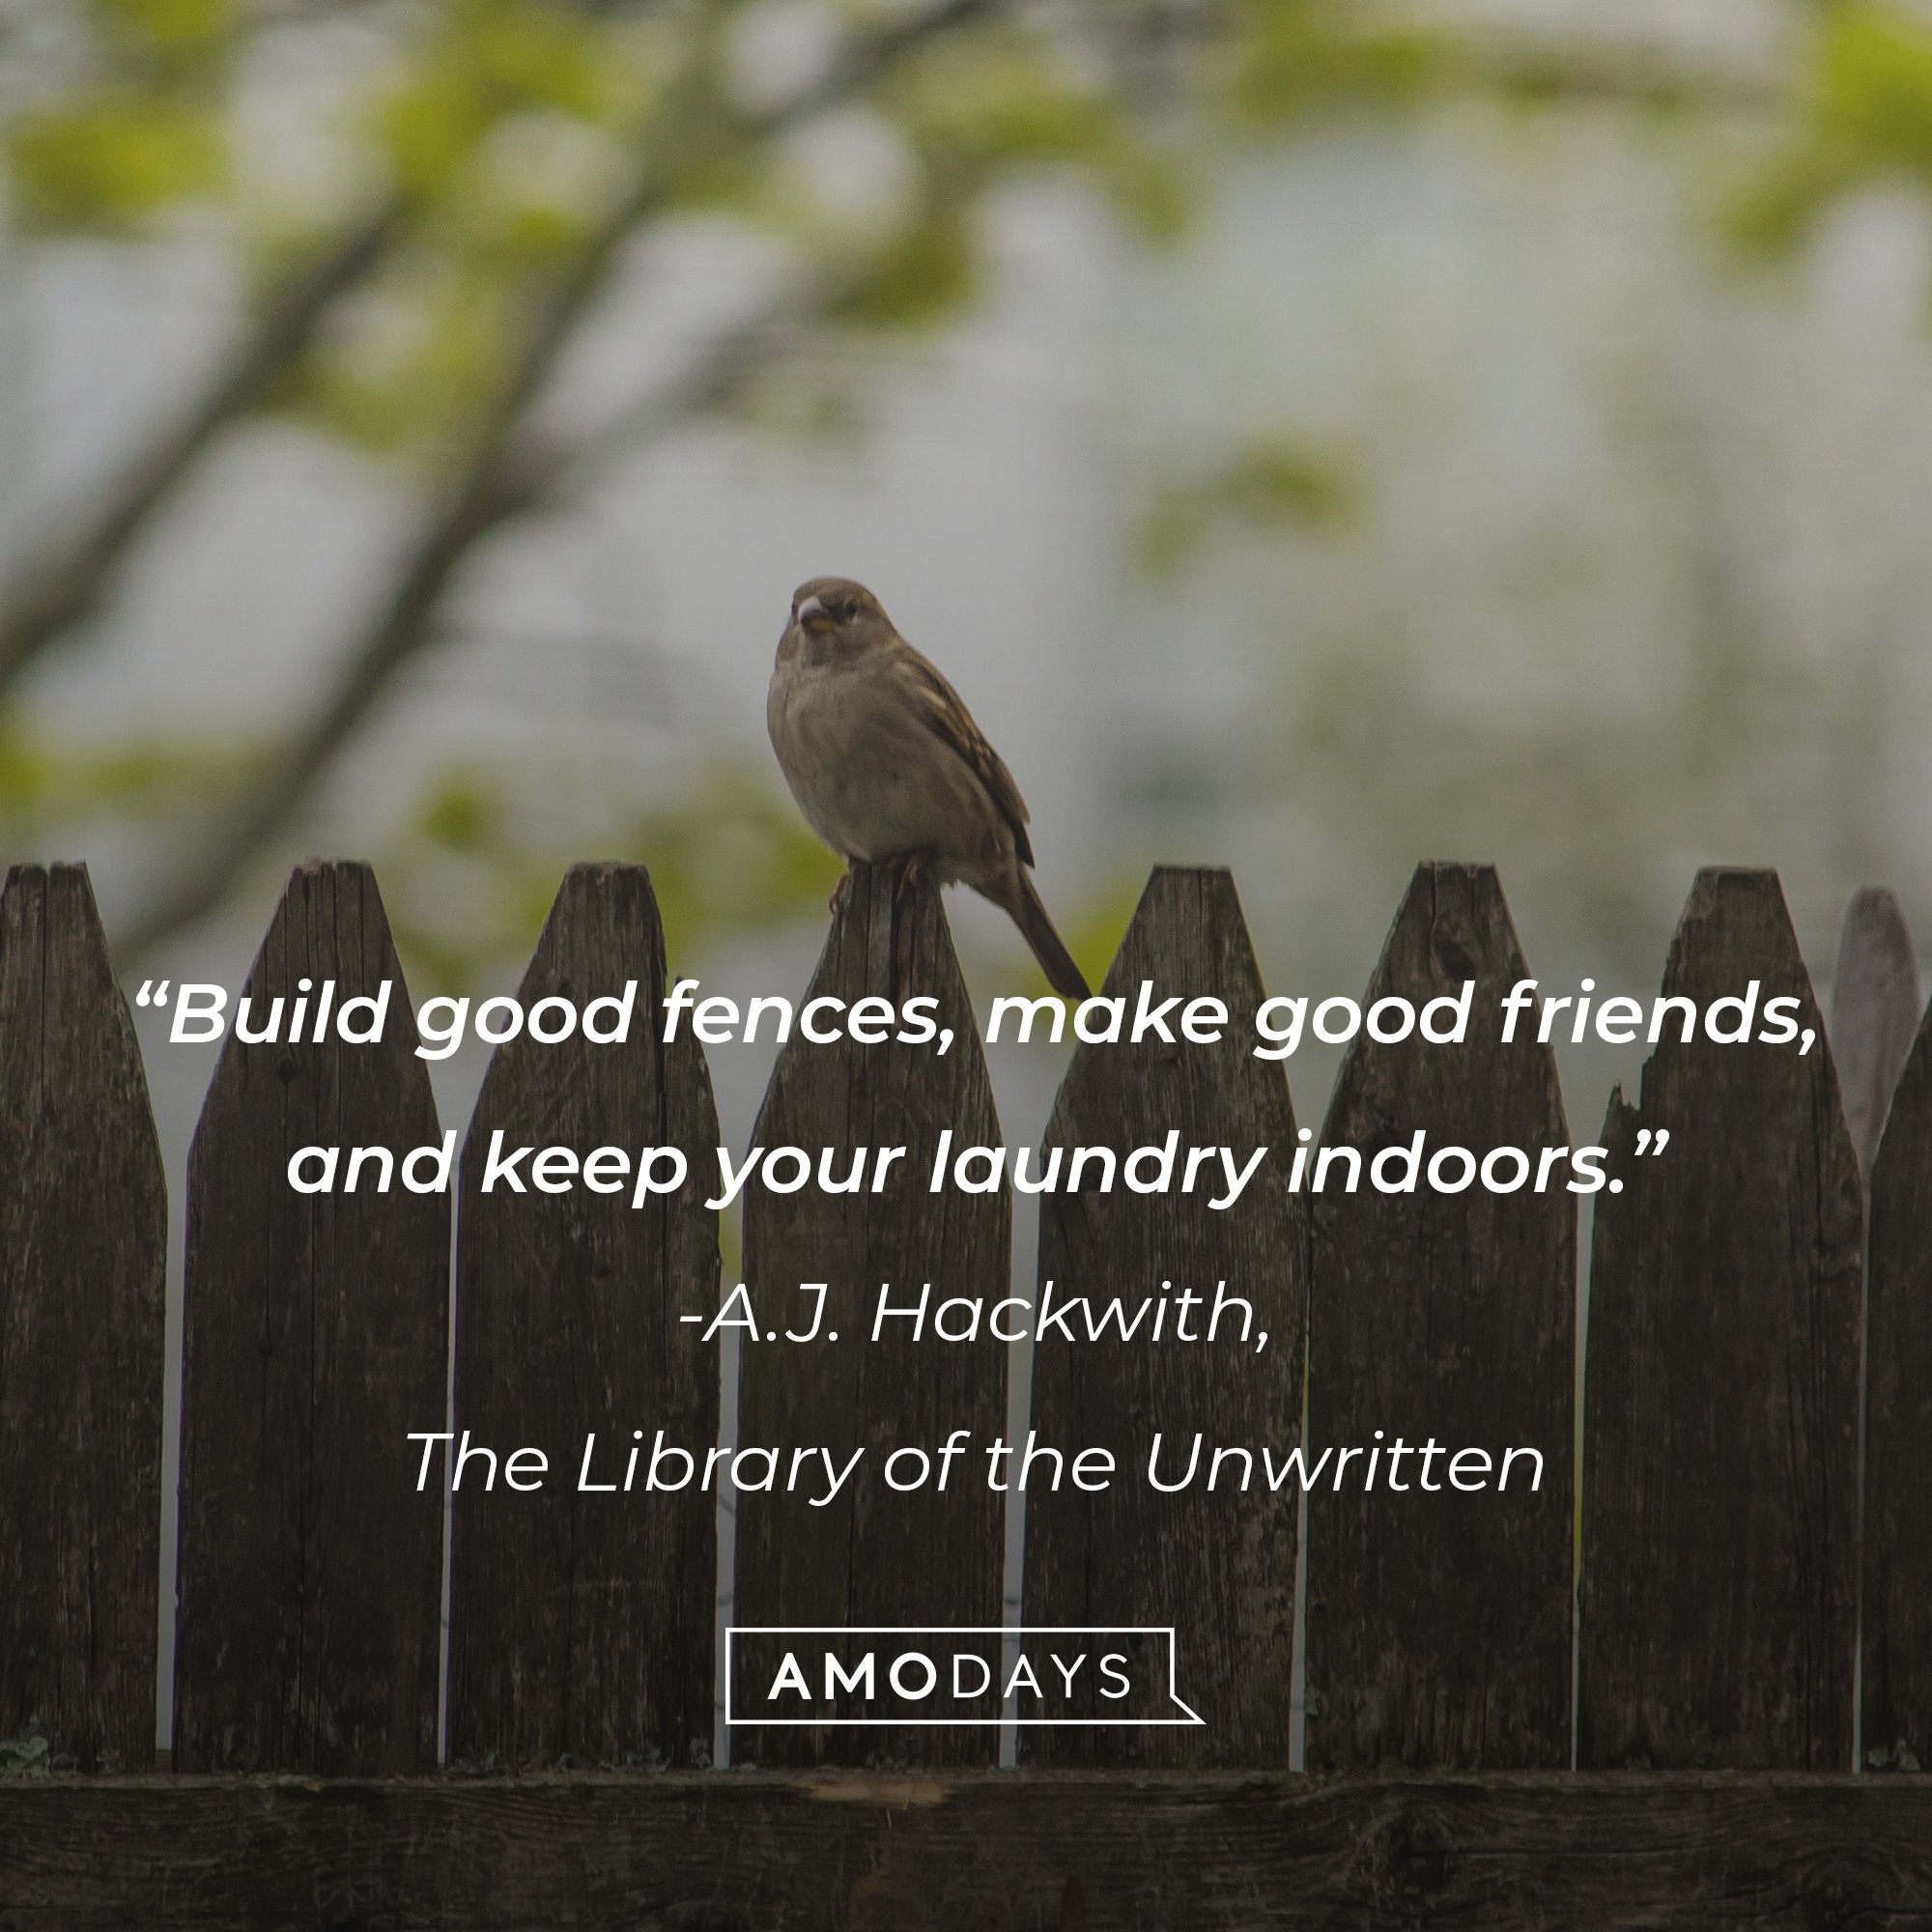 A.J. Hackwith's quote from The Library of the Unwritten: "Build good fences, make good friends, and keep your laundry indoors.” | Image: AmoDays